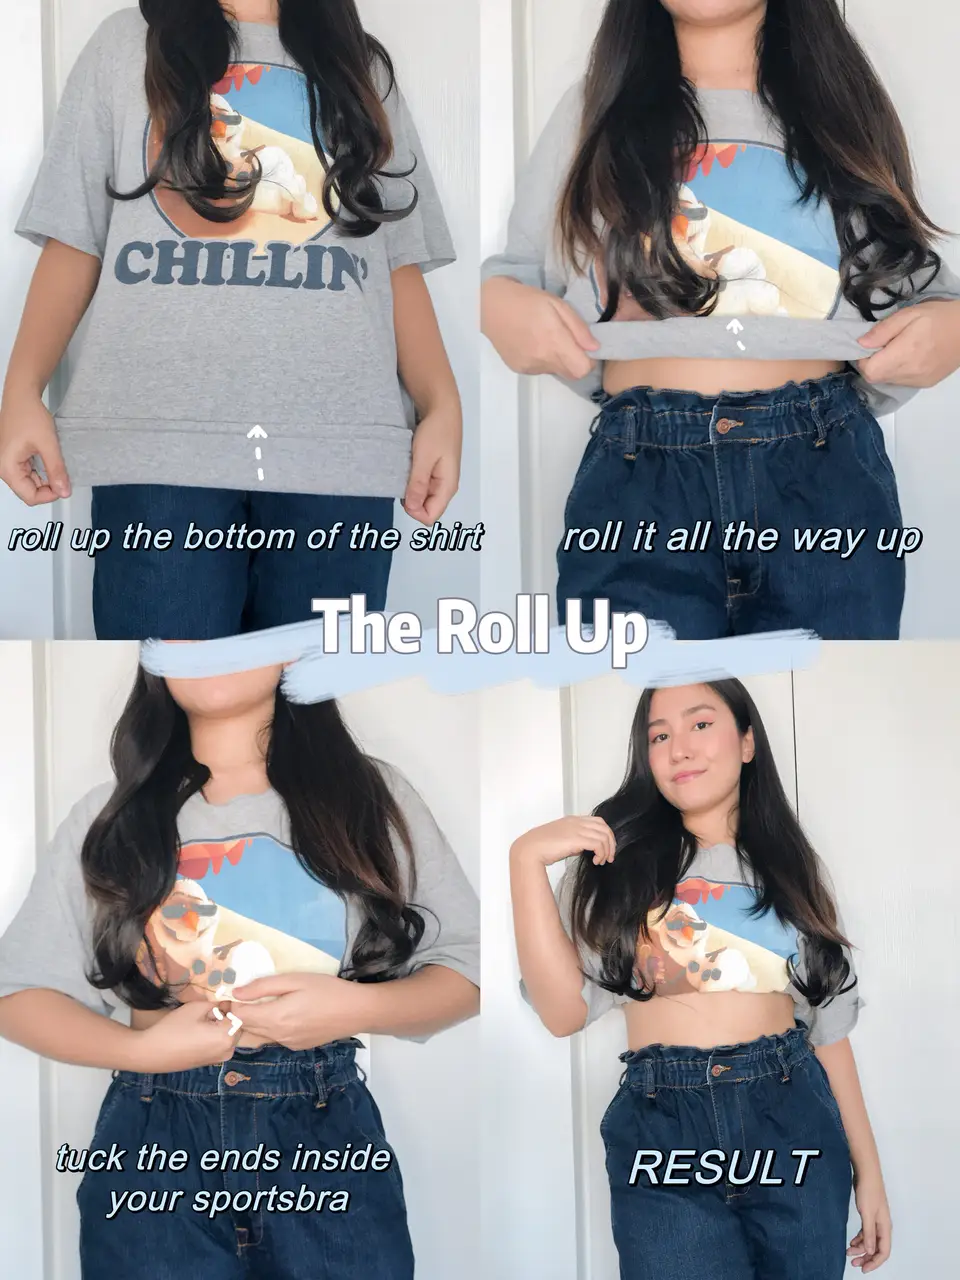 3 Ways To Crop Shirt Without Cutting It, Gallery posted by Aizelle 💜